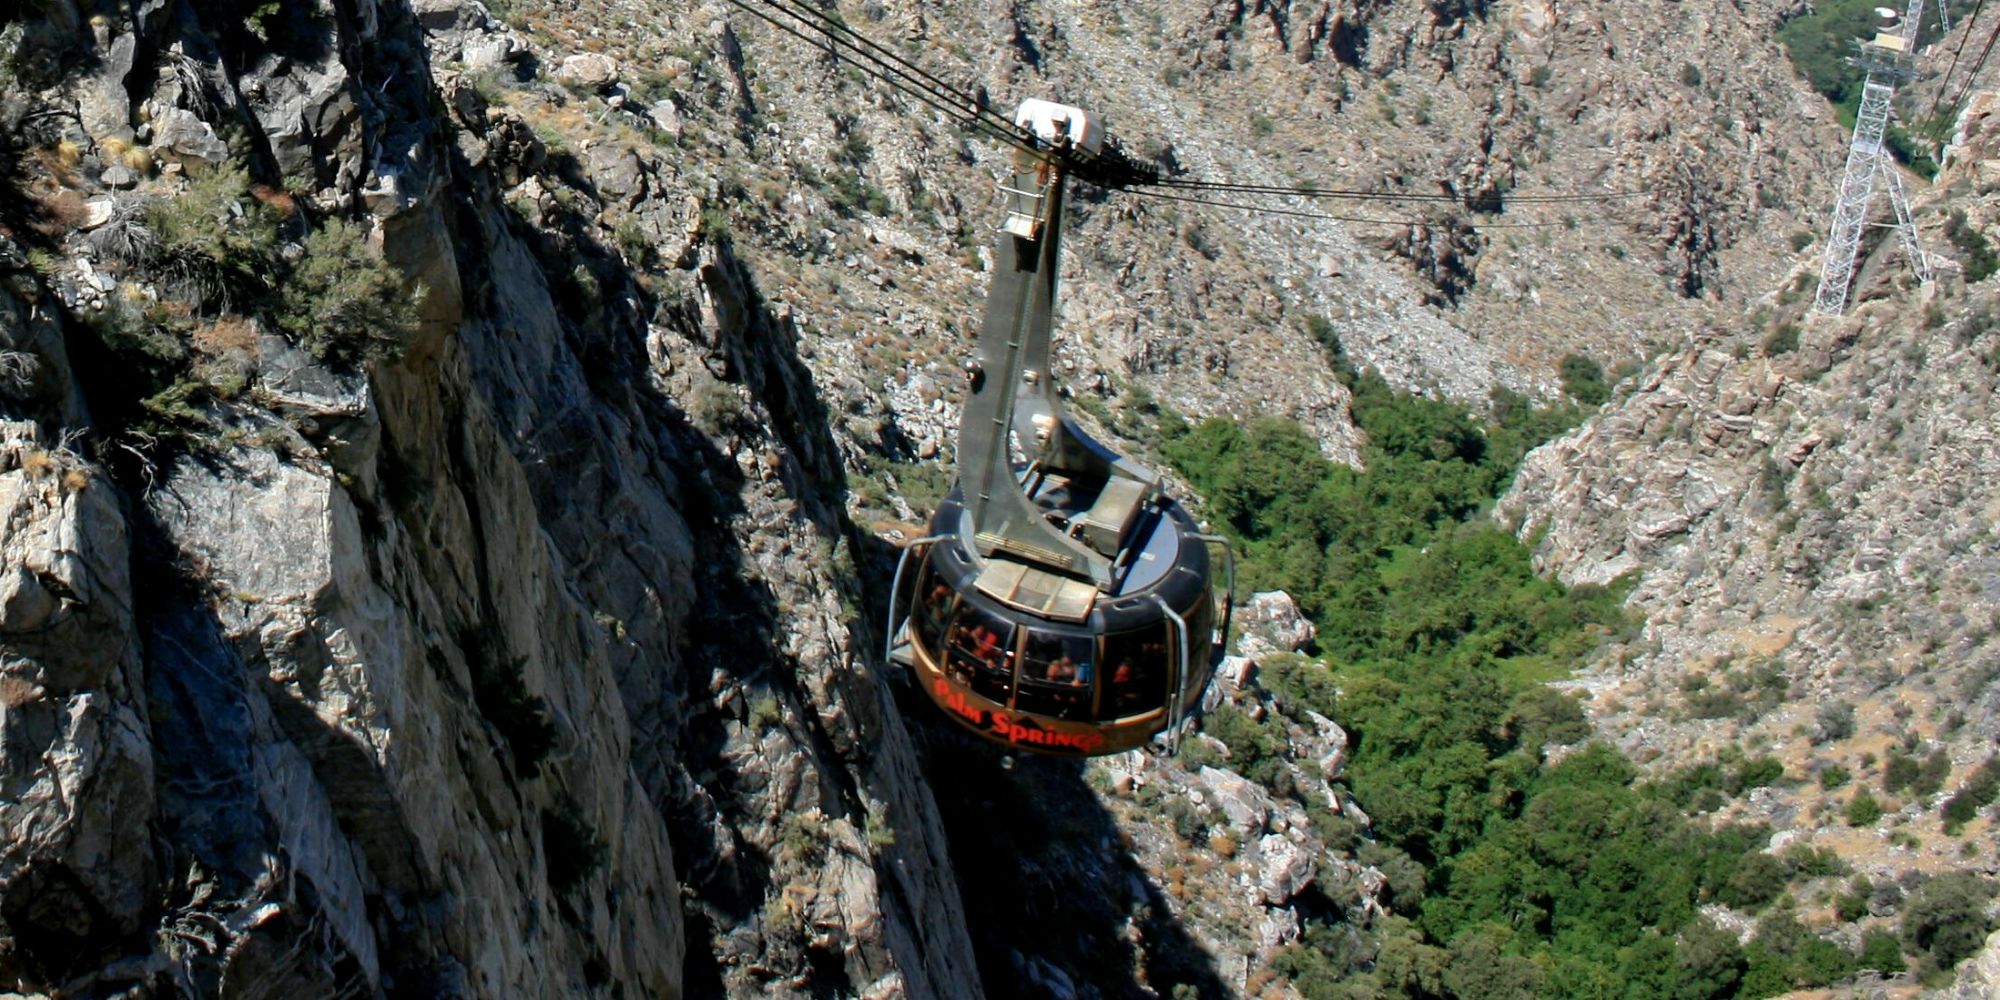 Visit the Palm Springs Aerial Tramway